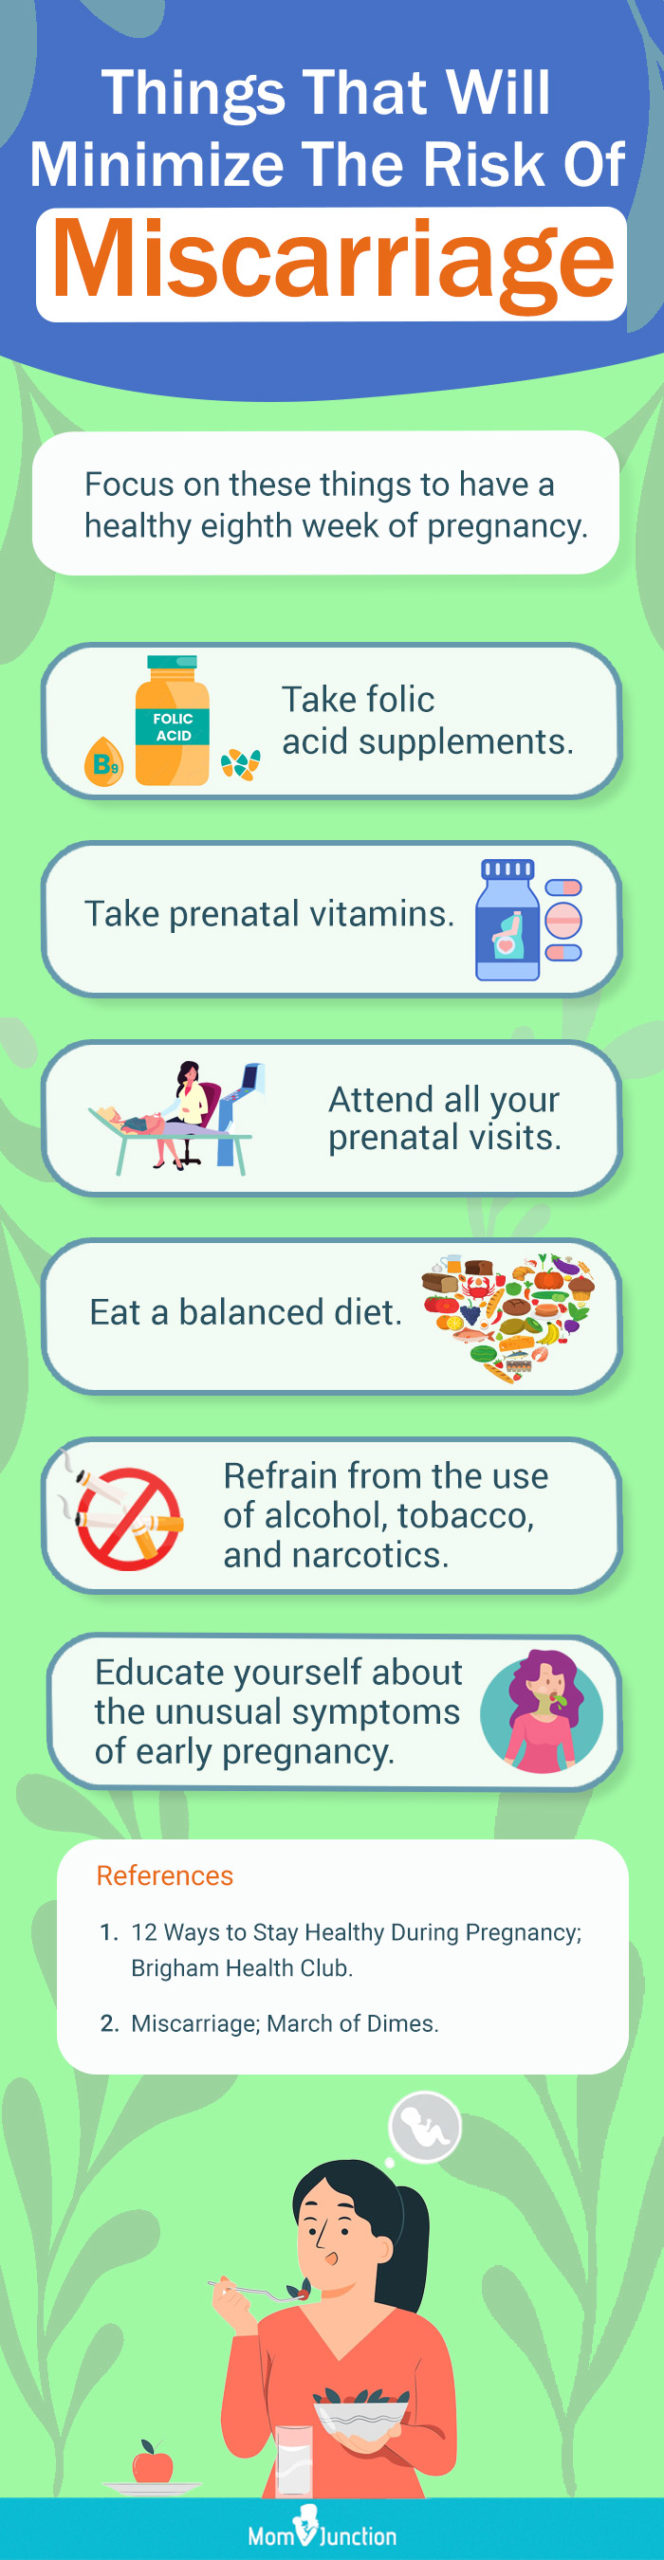 things that will minimize the risk of miscarriage than worrying (infographic)